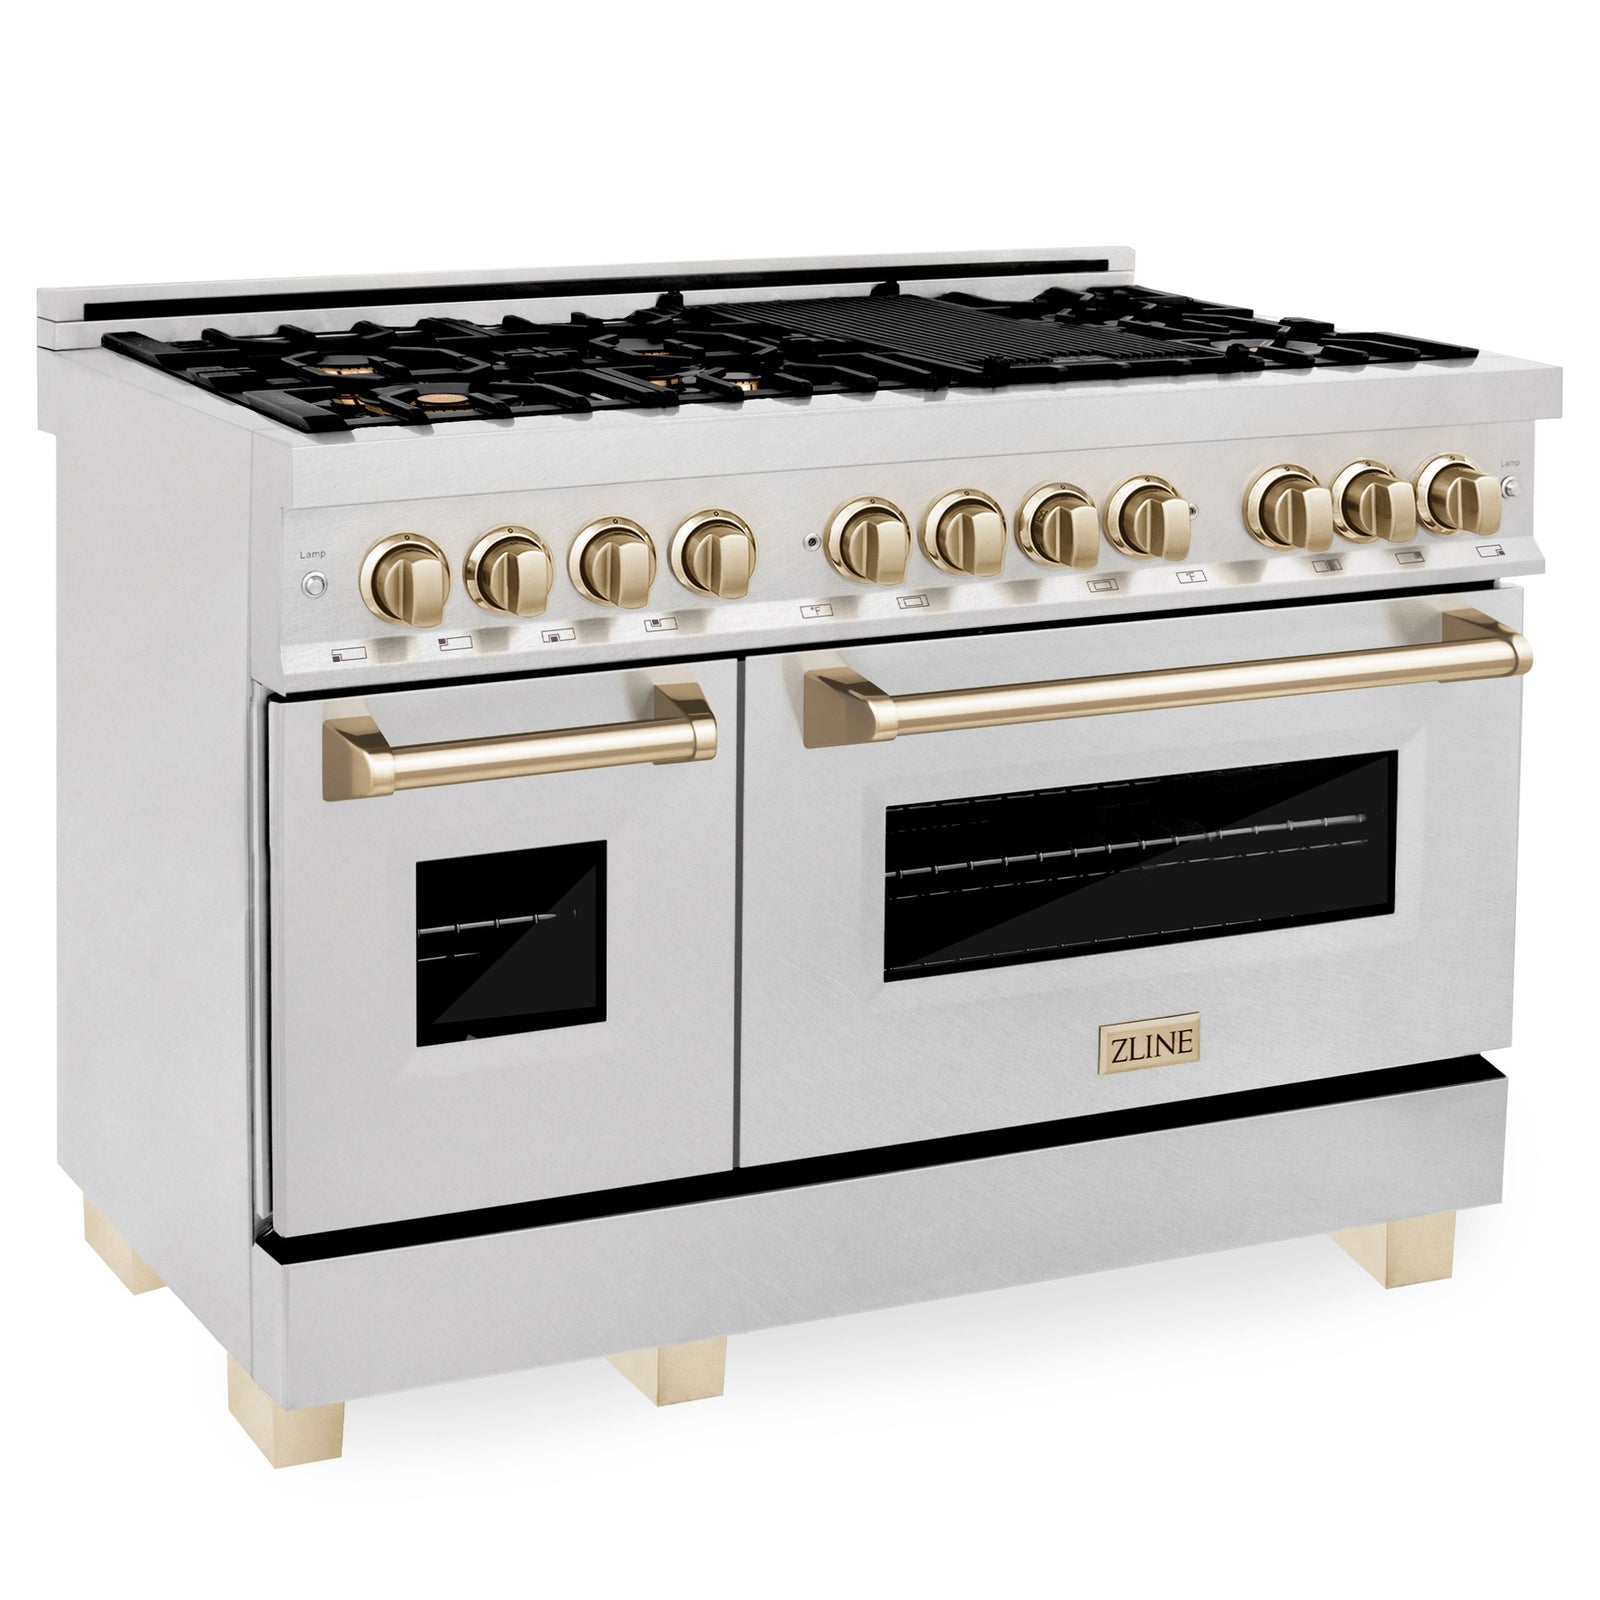 ZLINE Autograph 48 in. Gas Burner/Electric Oven in DuraSnow® Stainless Steel with Gold Accents, RASZ-SN-48-G - Smart Kitchen Lab